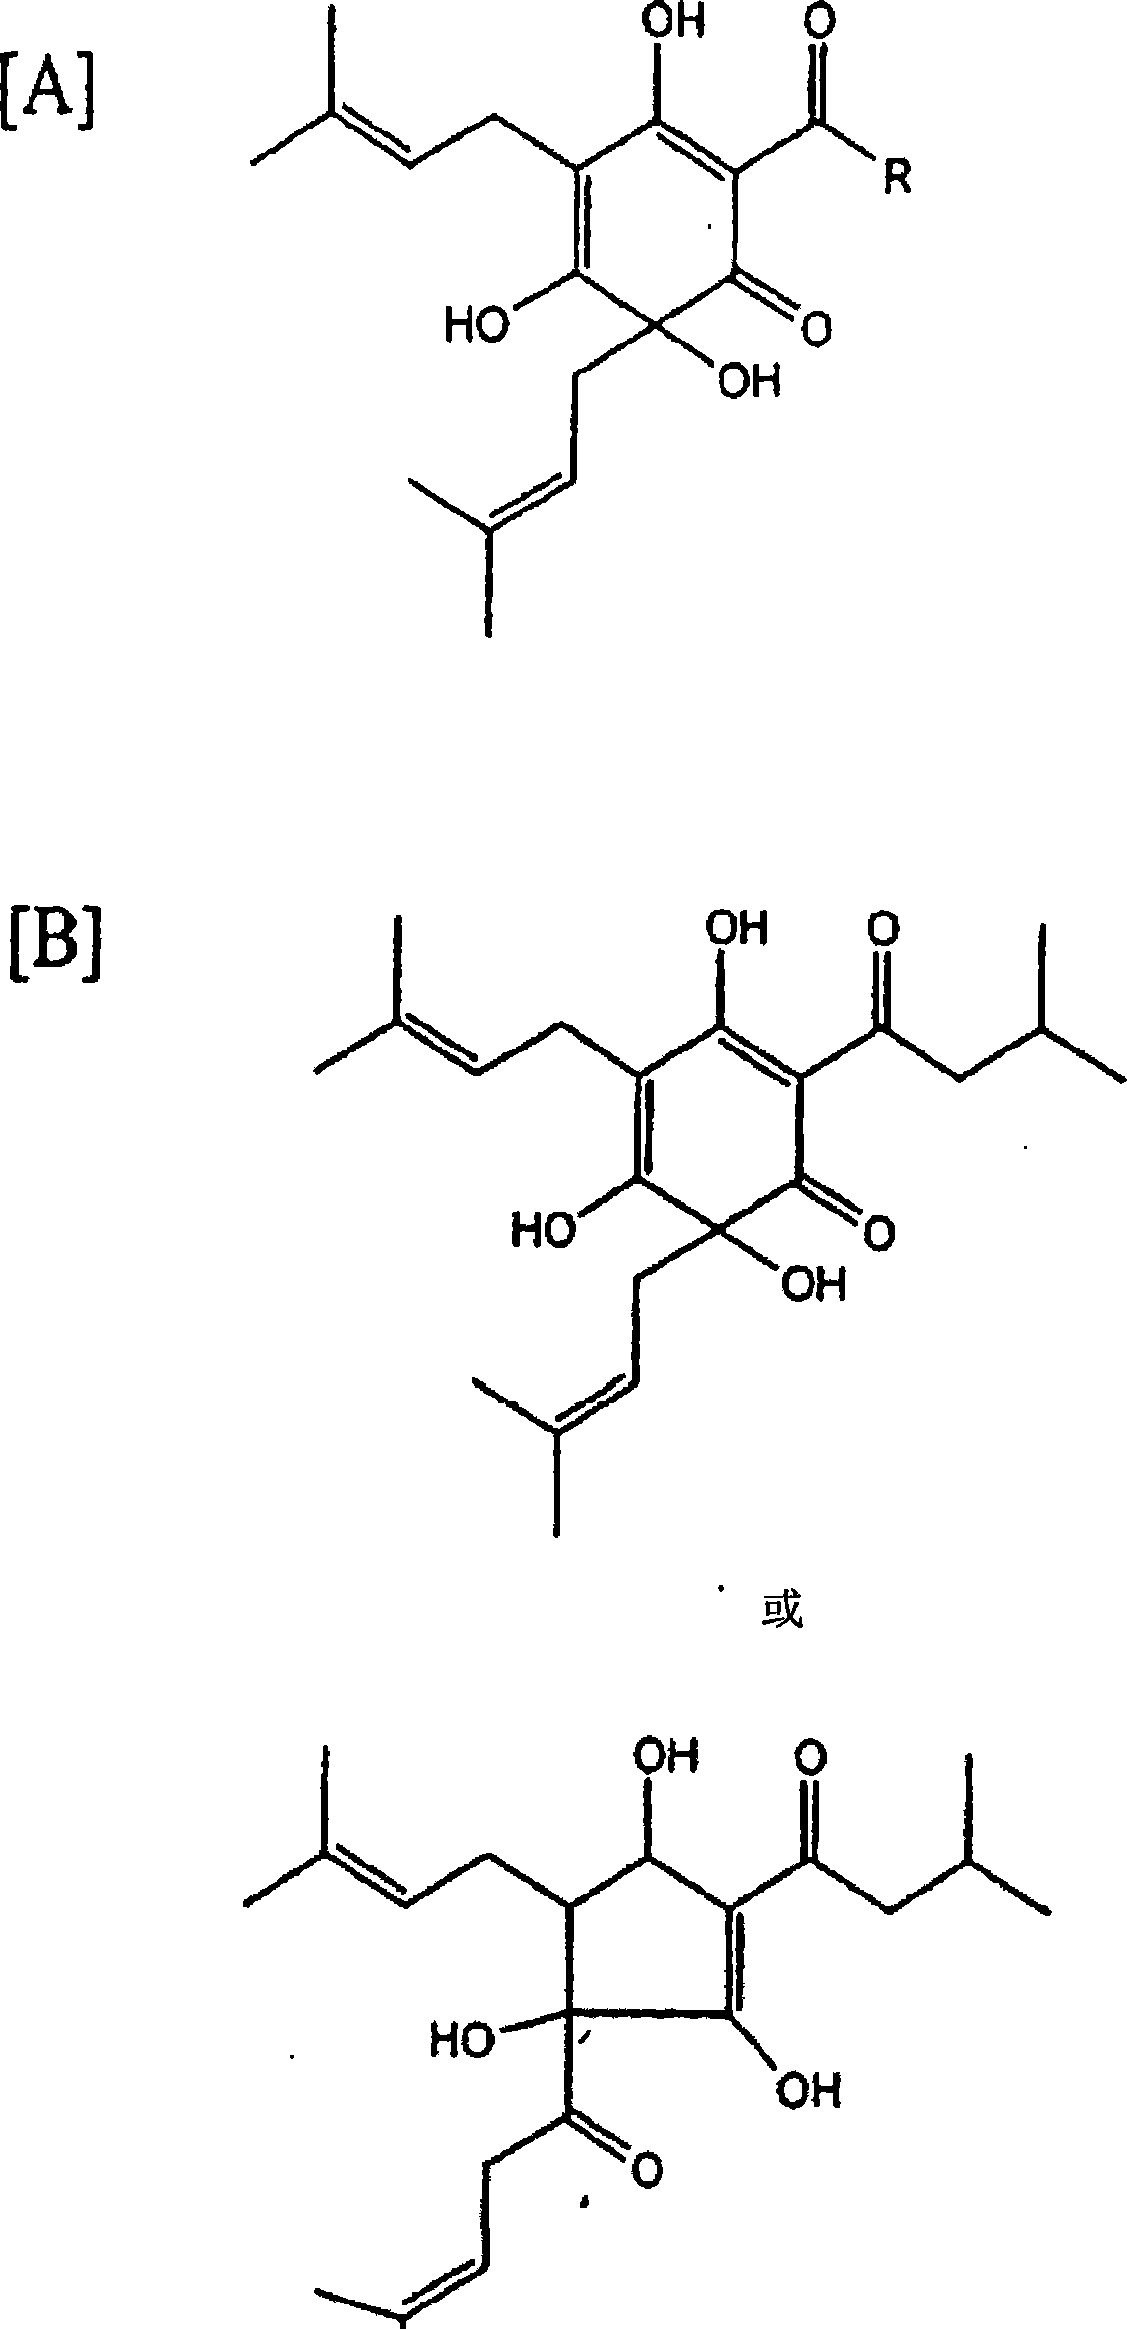 Compositions exhibiting inhibition of cyclooxygenase-2